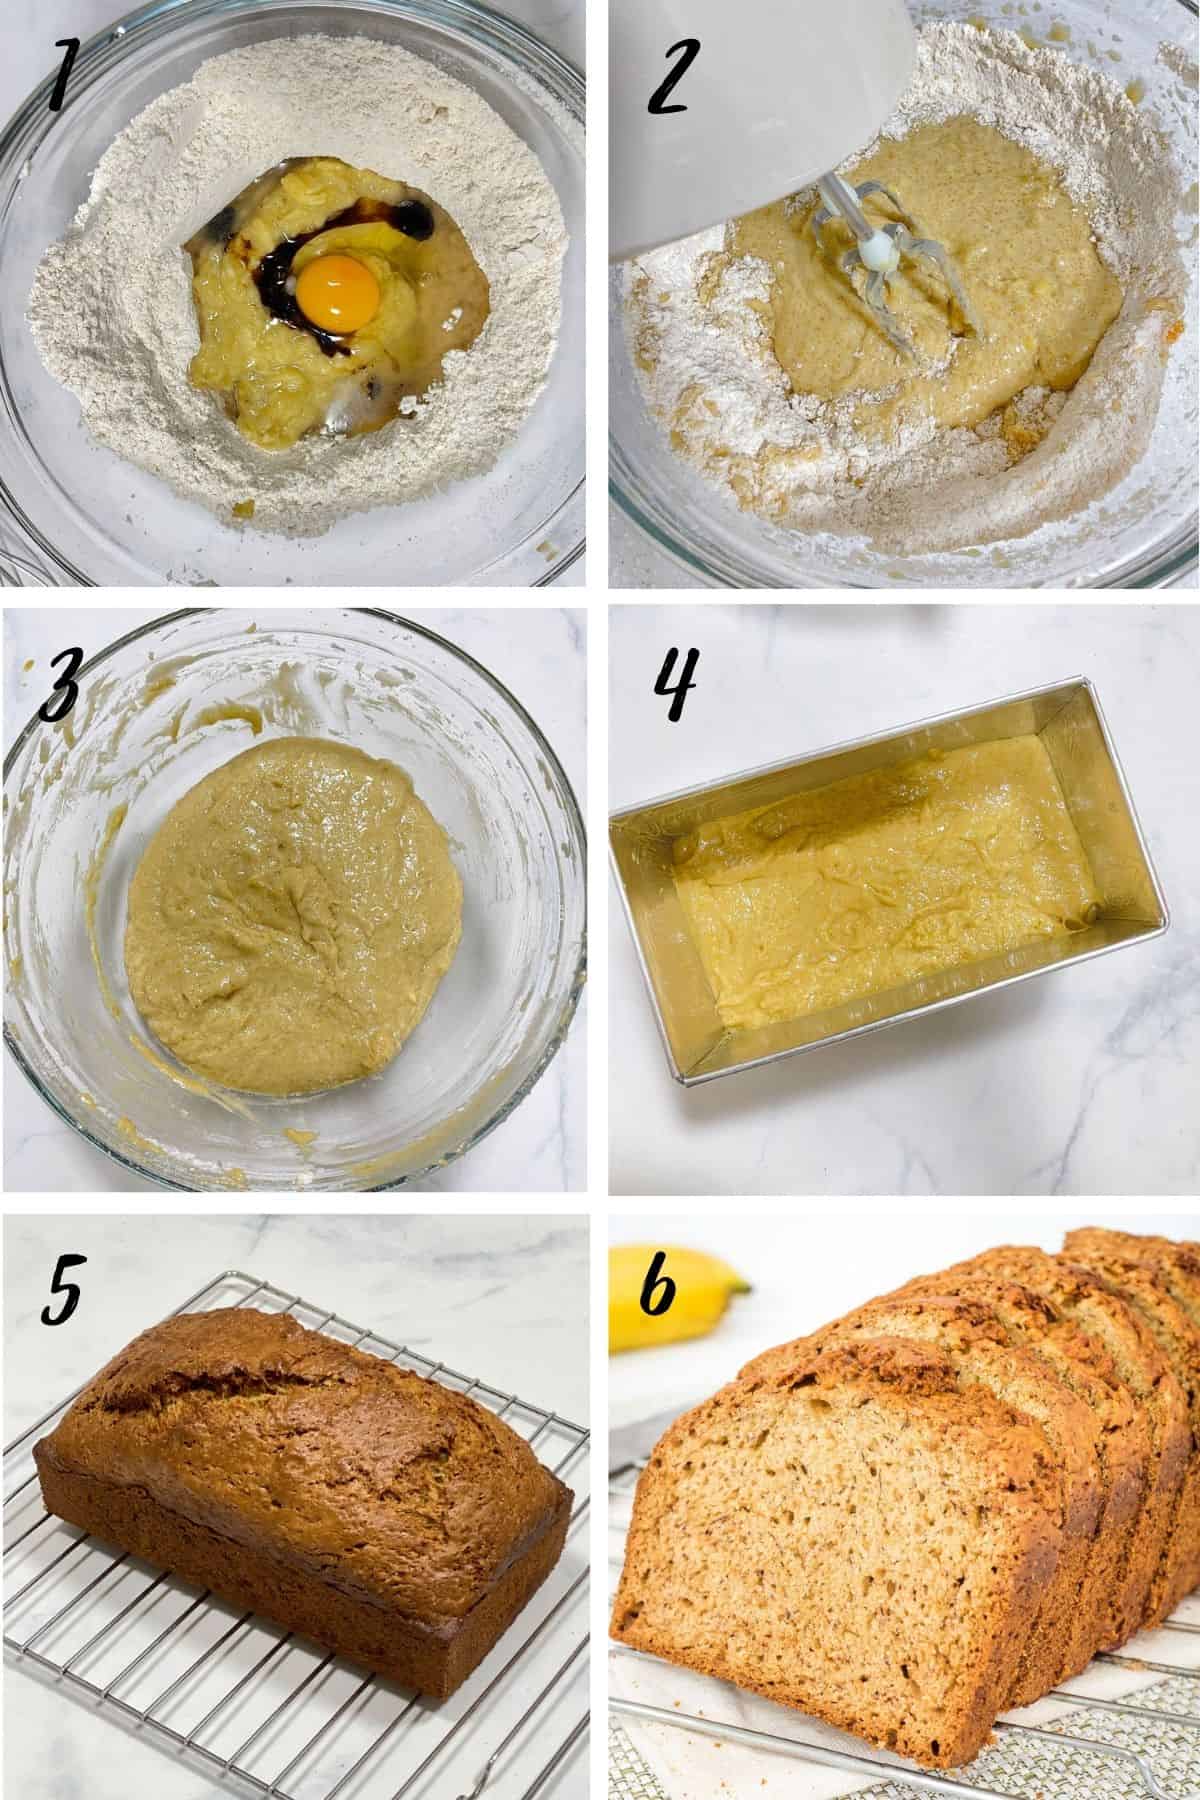 A poster of 6 images showing how to bake banana bread.